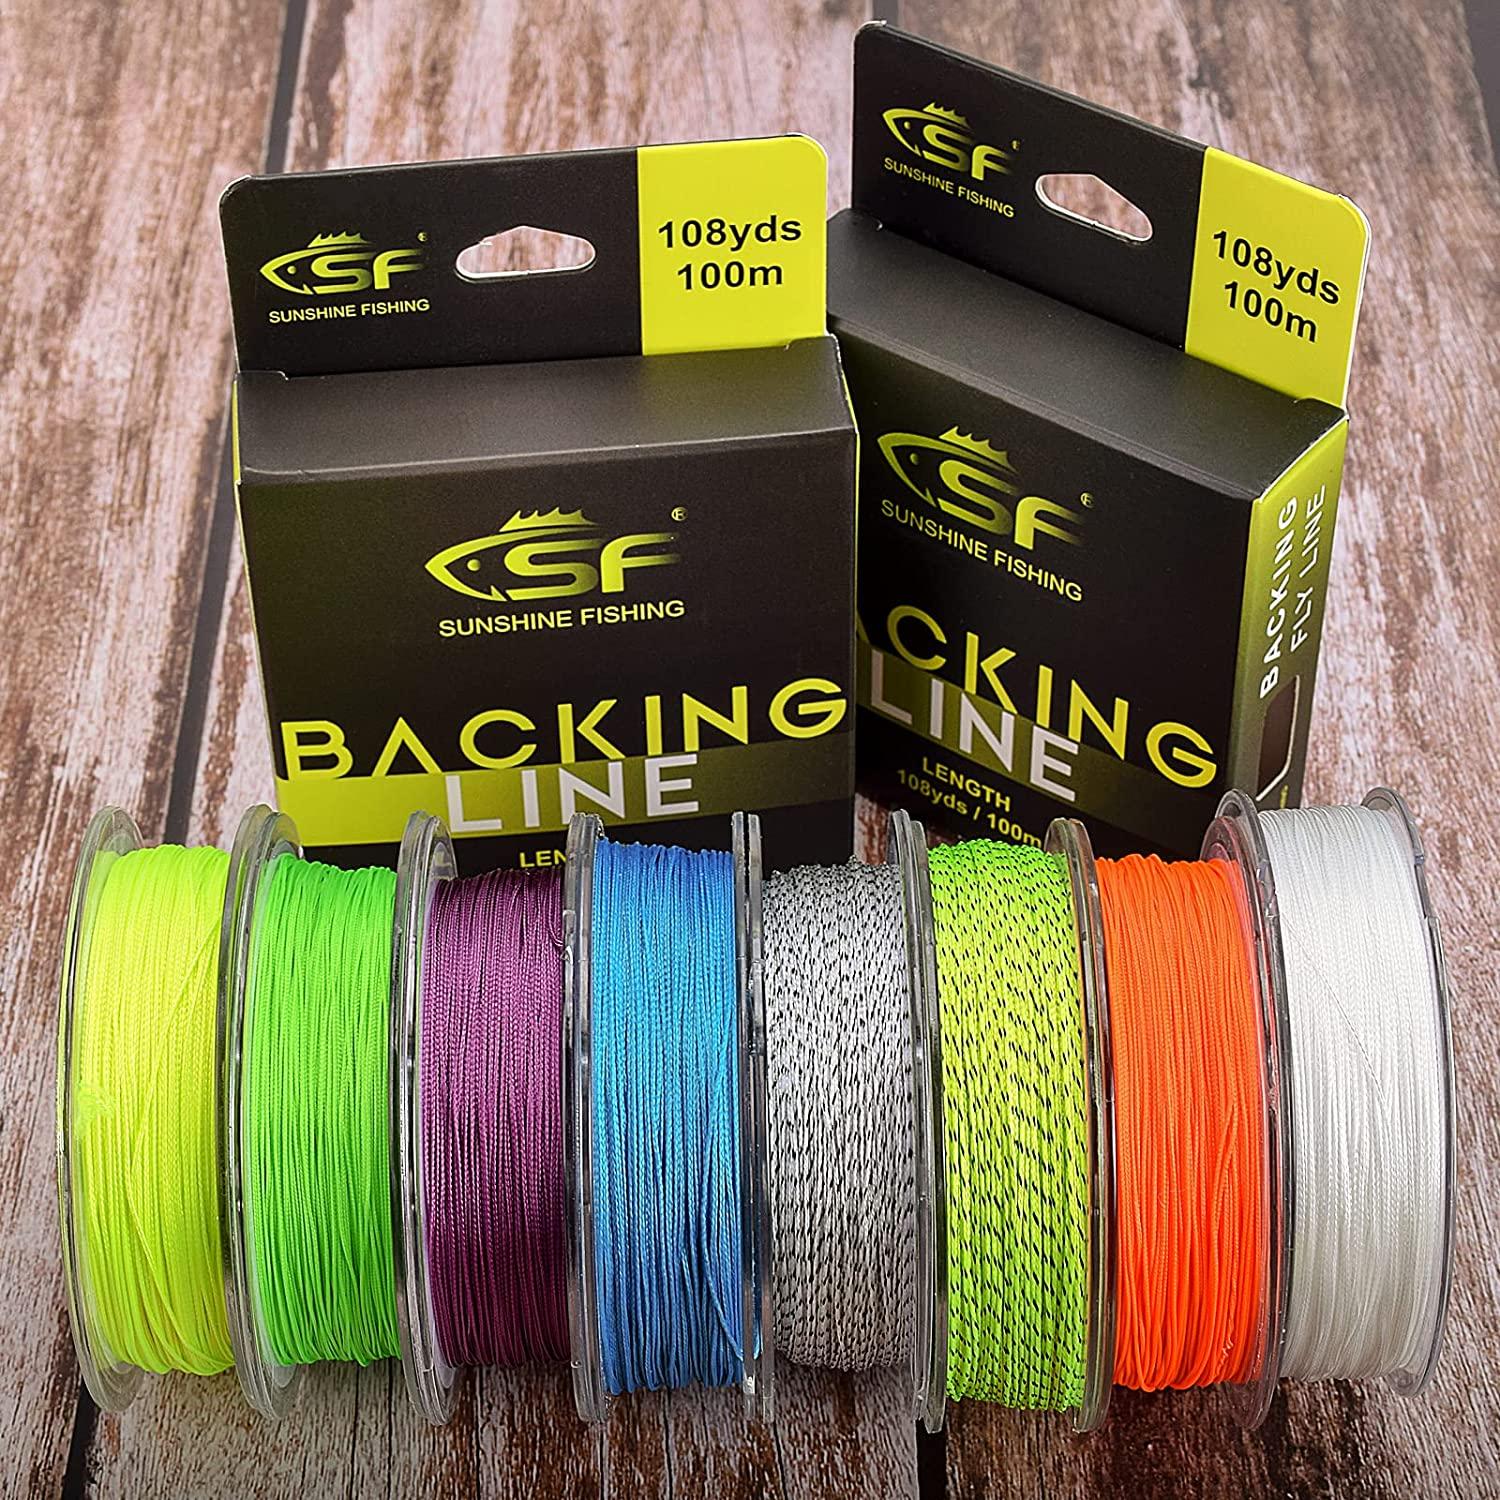 Dropship Kylebooker Fly Line Backing Line 20/30LB 100/300Yards Orange  Braided Fly Fishing Line to Sell Online at a Lower Price